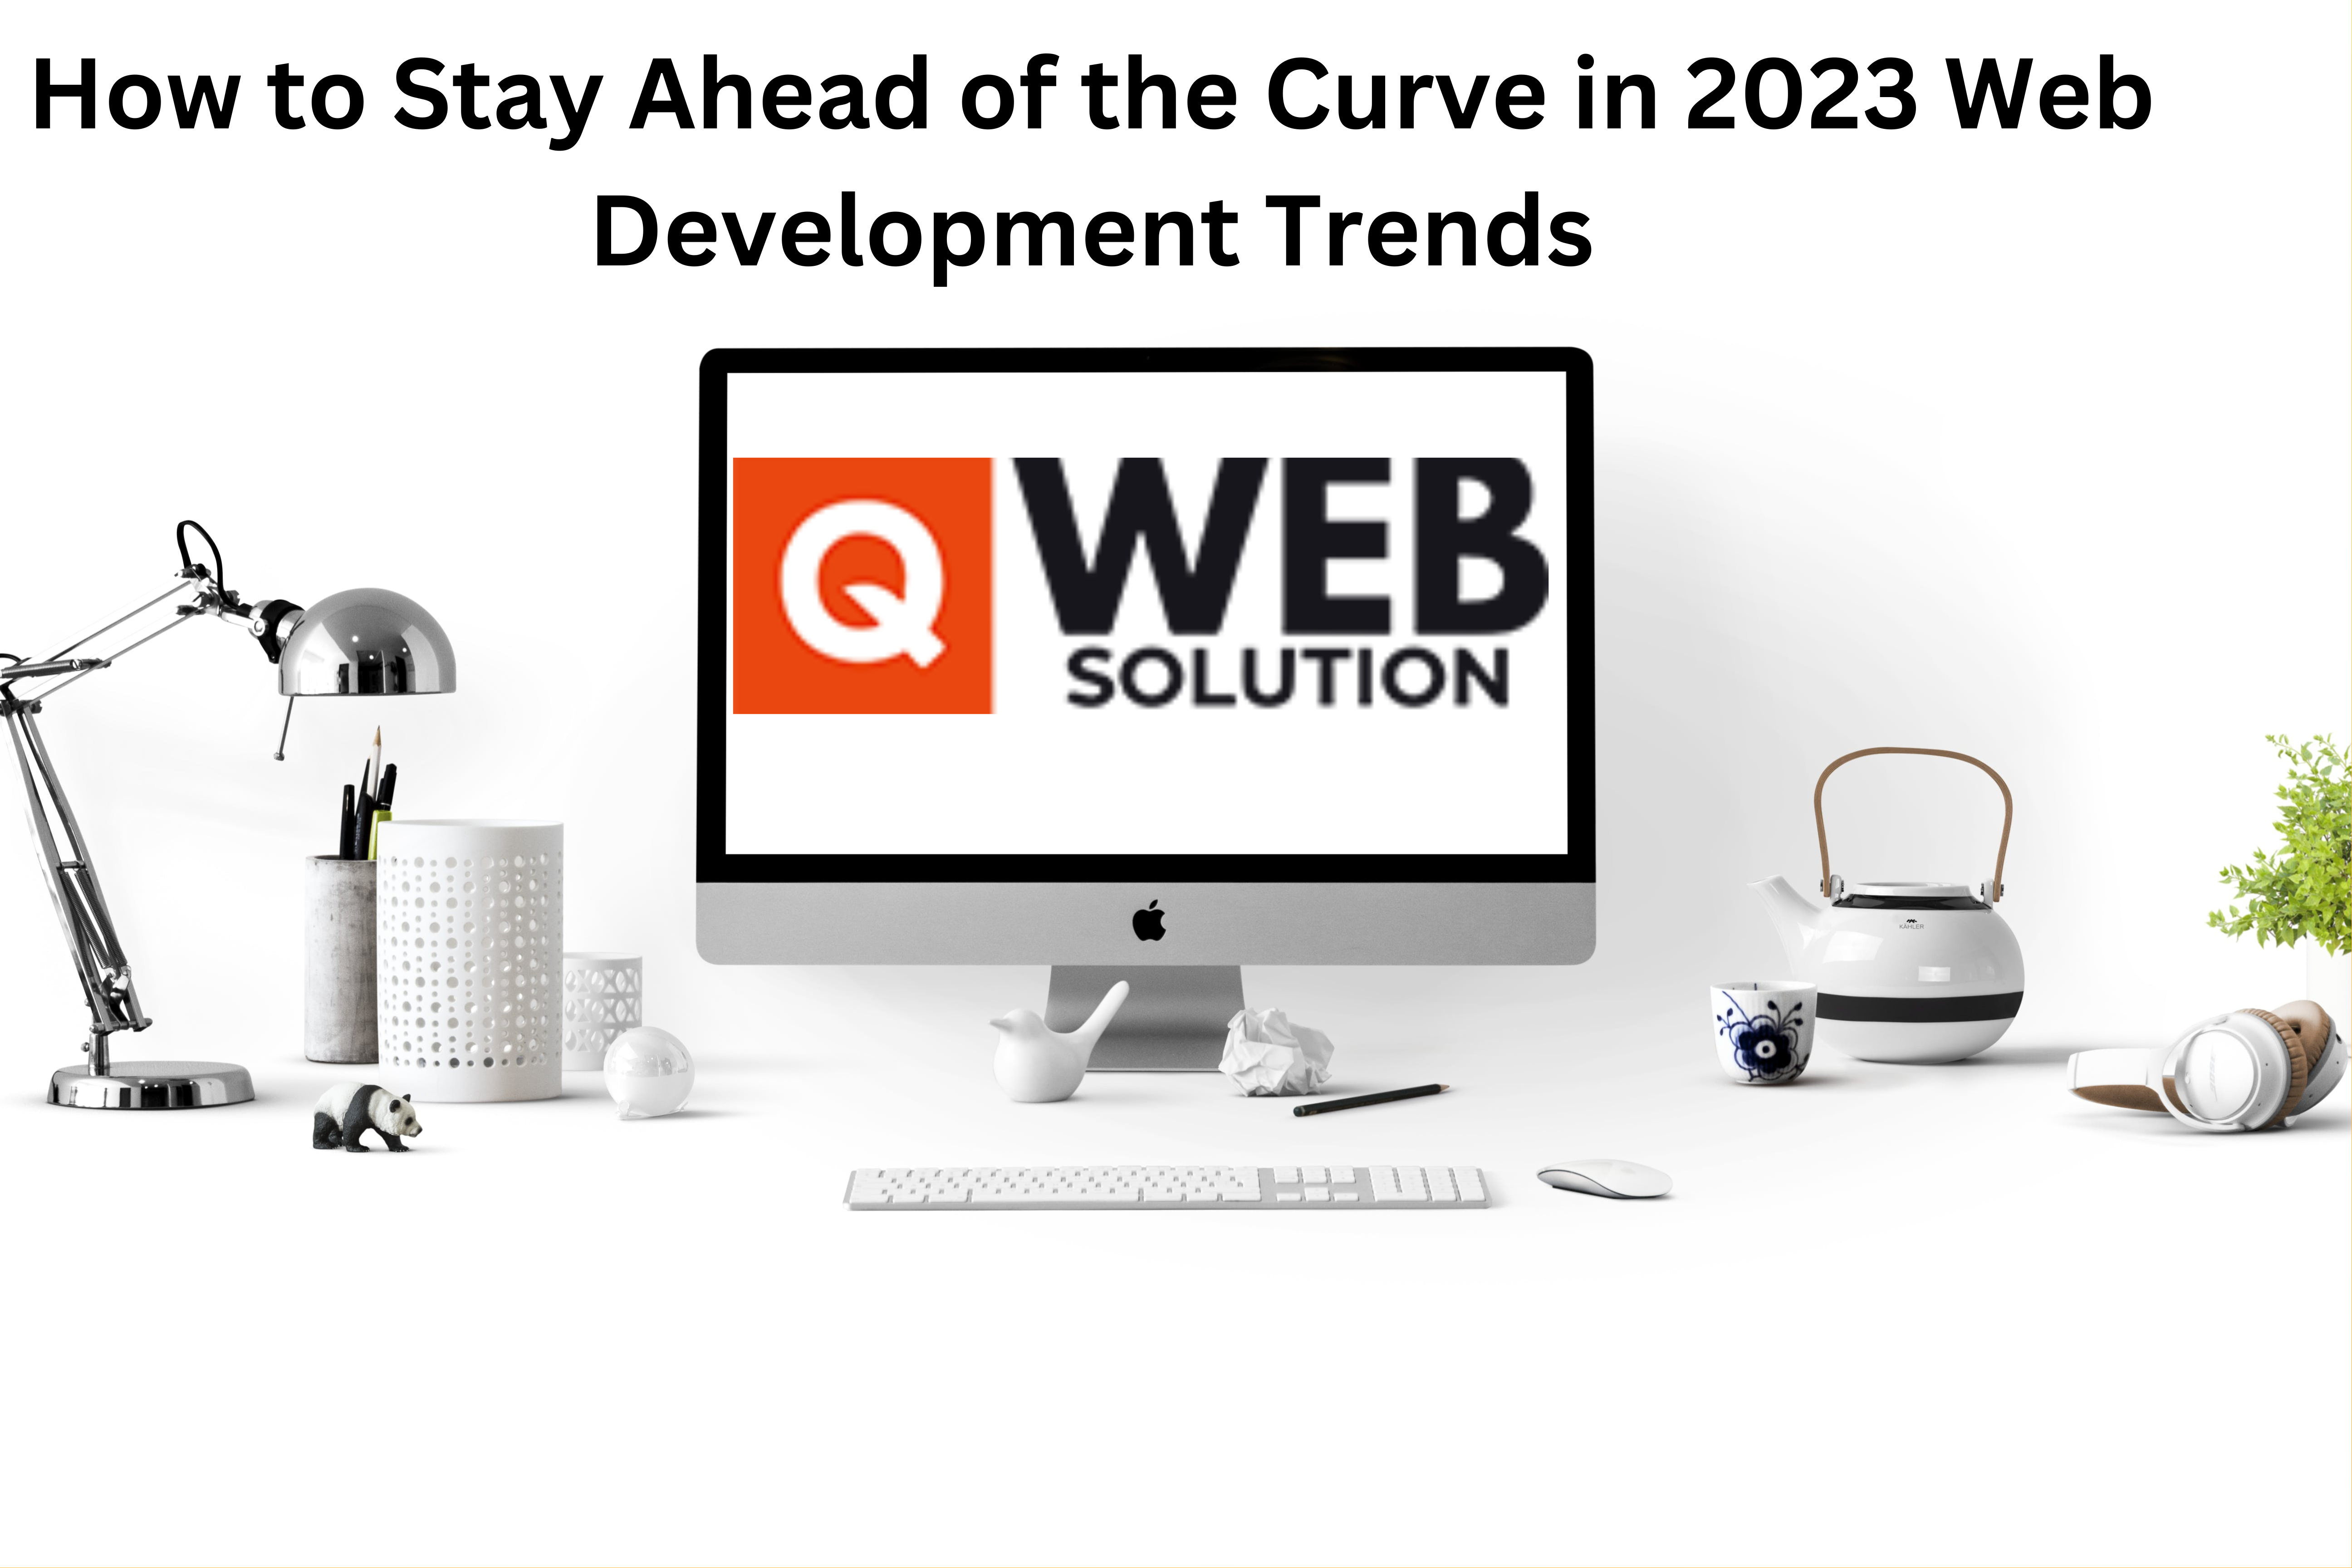 How to Stay Ahead of the Curve in 2023 Web Development Trends